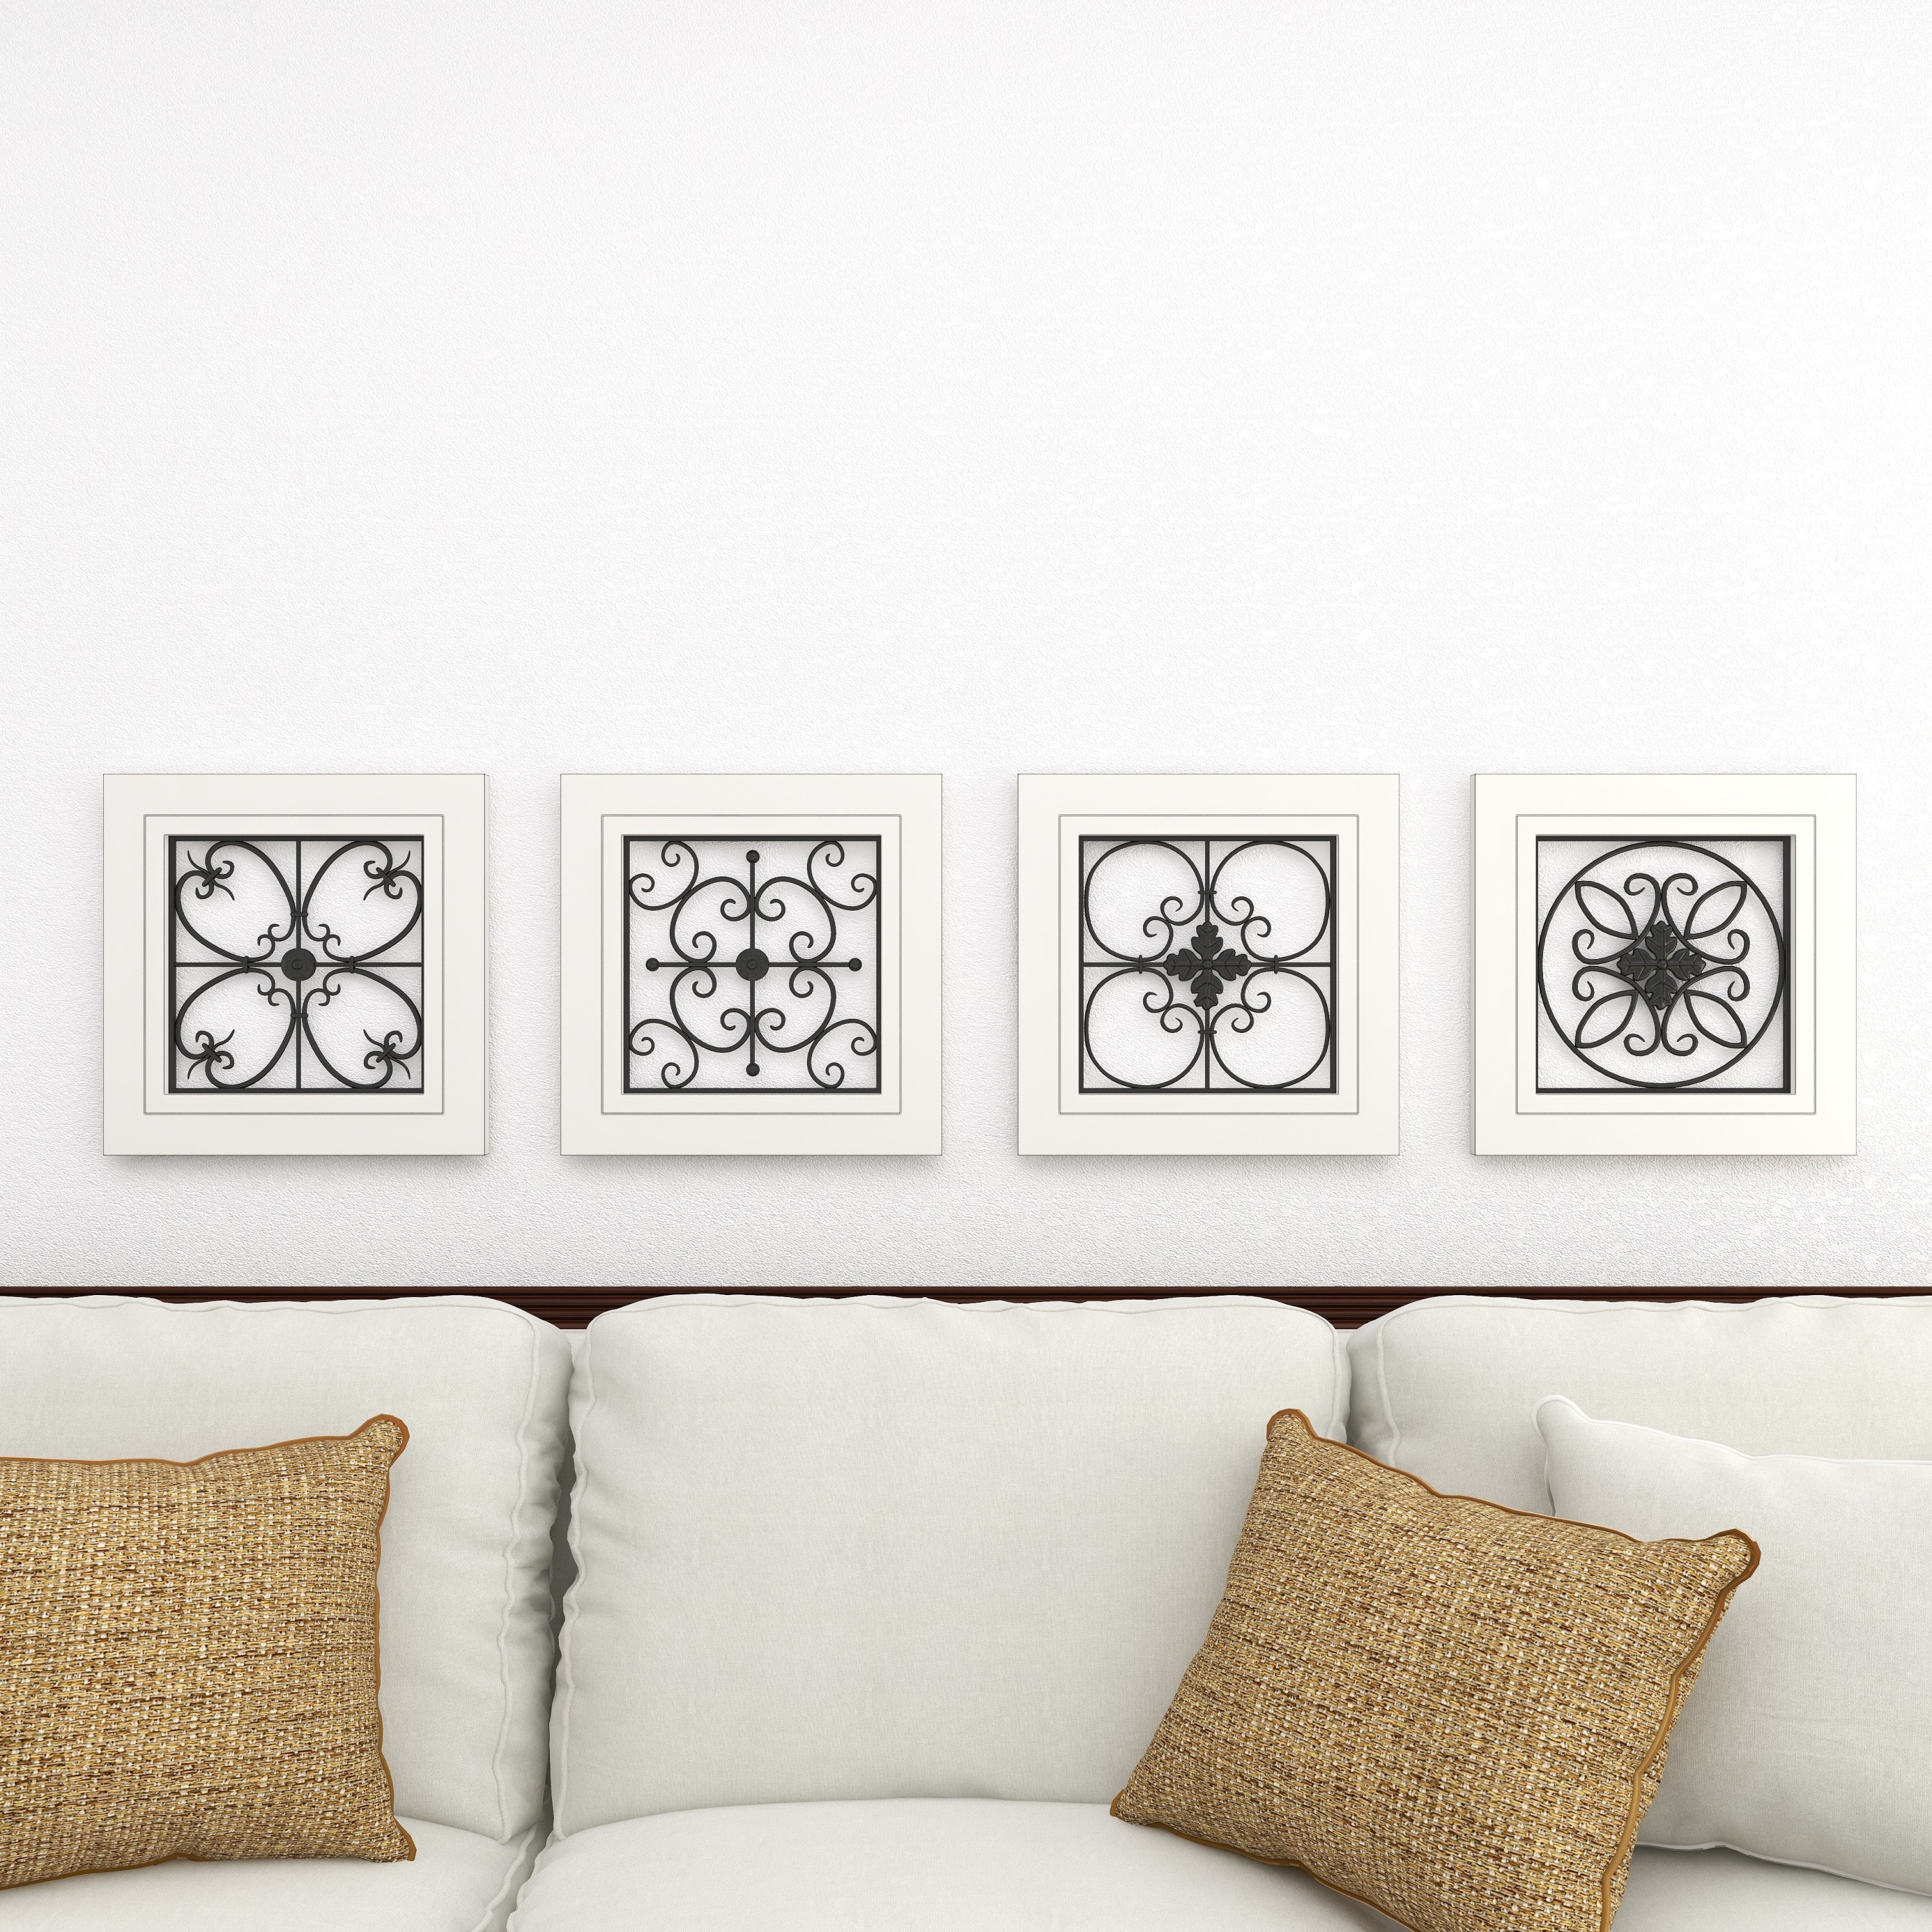 DecMode White Wood Scroll Wall Decor with Metal Relief (4 Count) - image 12 of 15